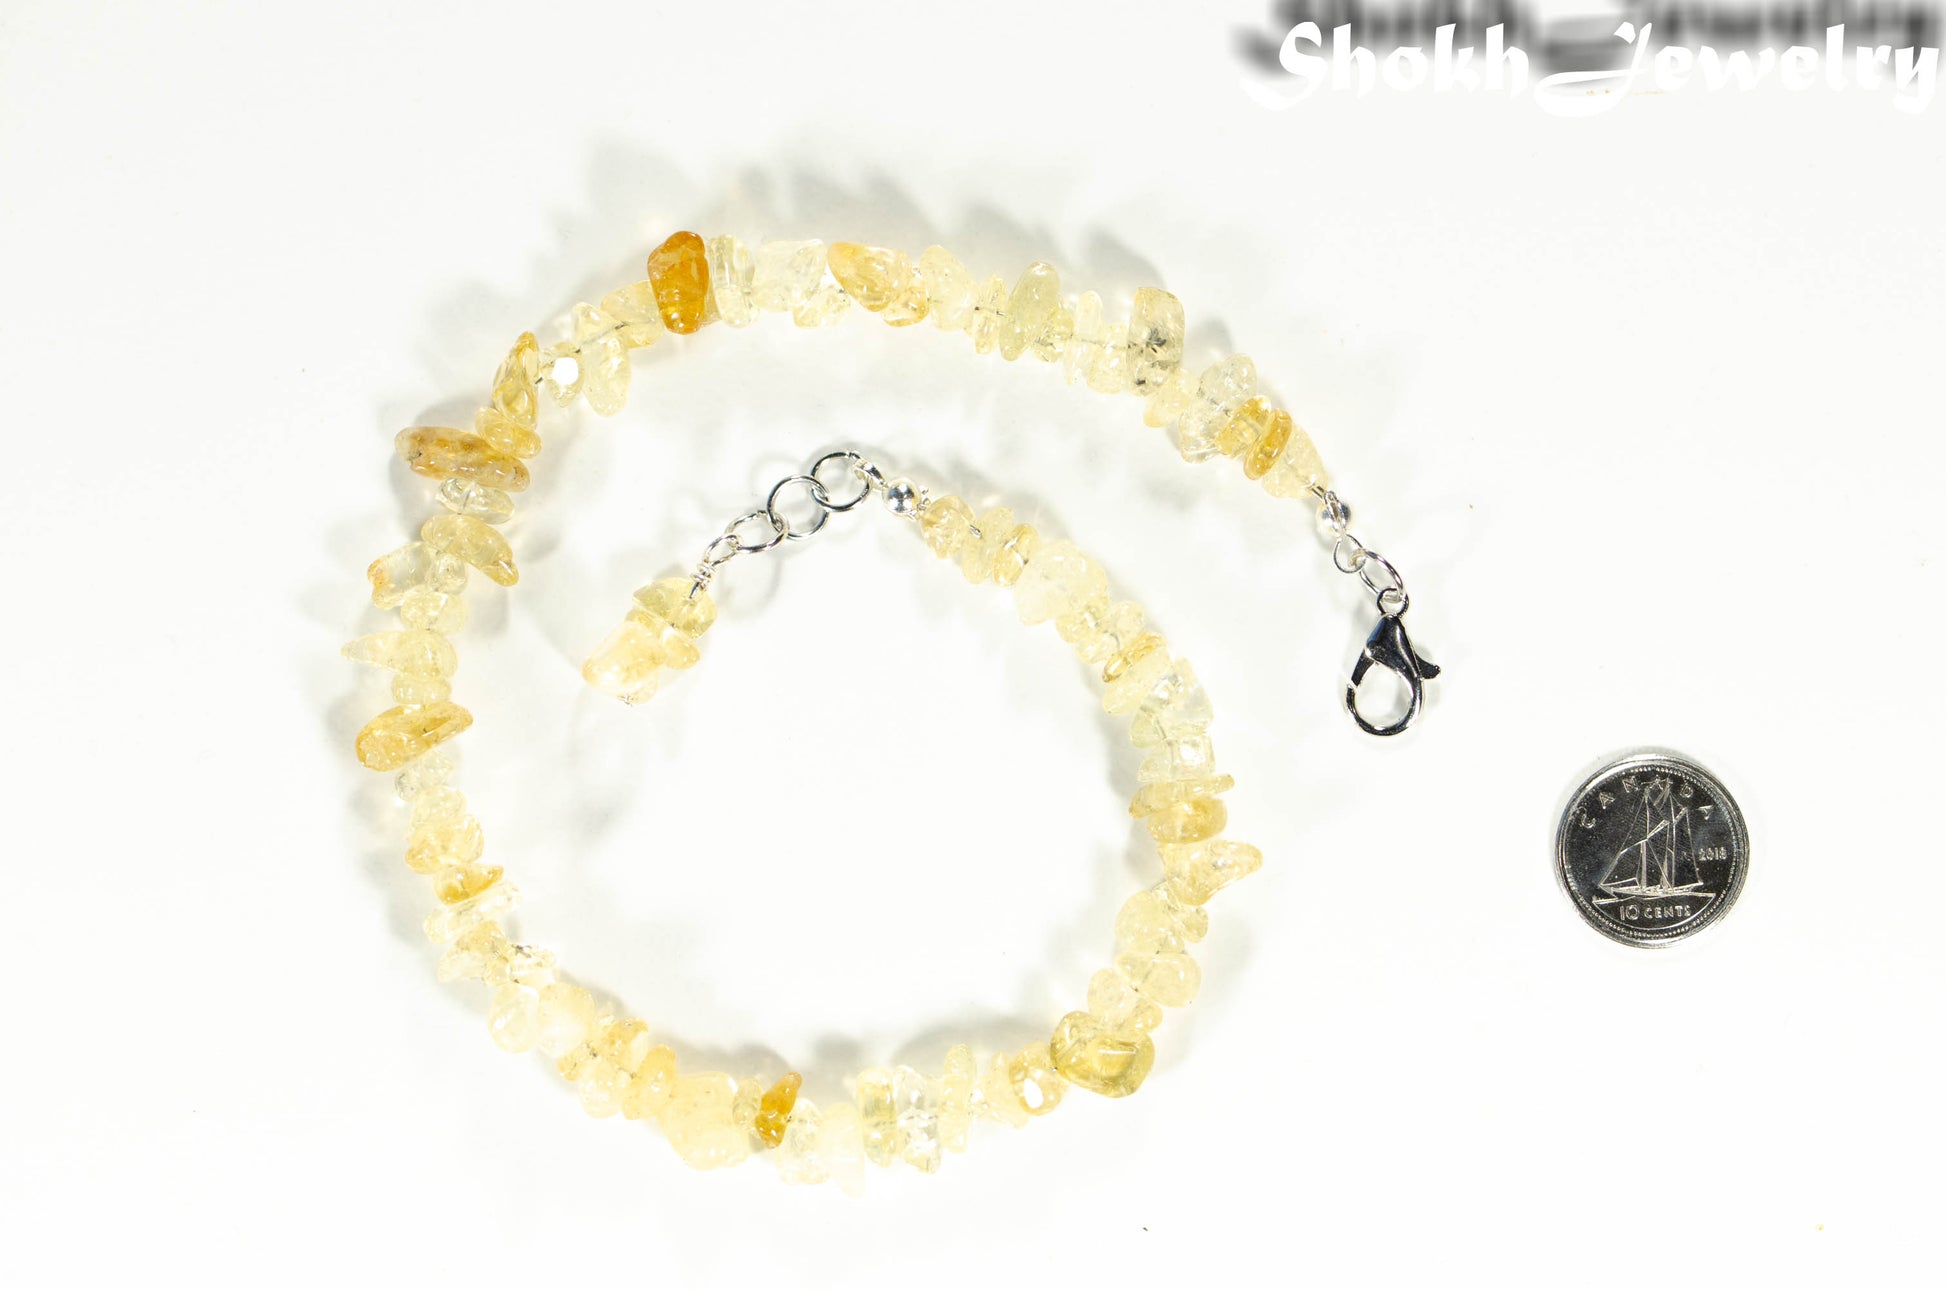 Natural Citrine Crystal Chip Choker Necklace beside a dime